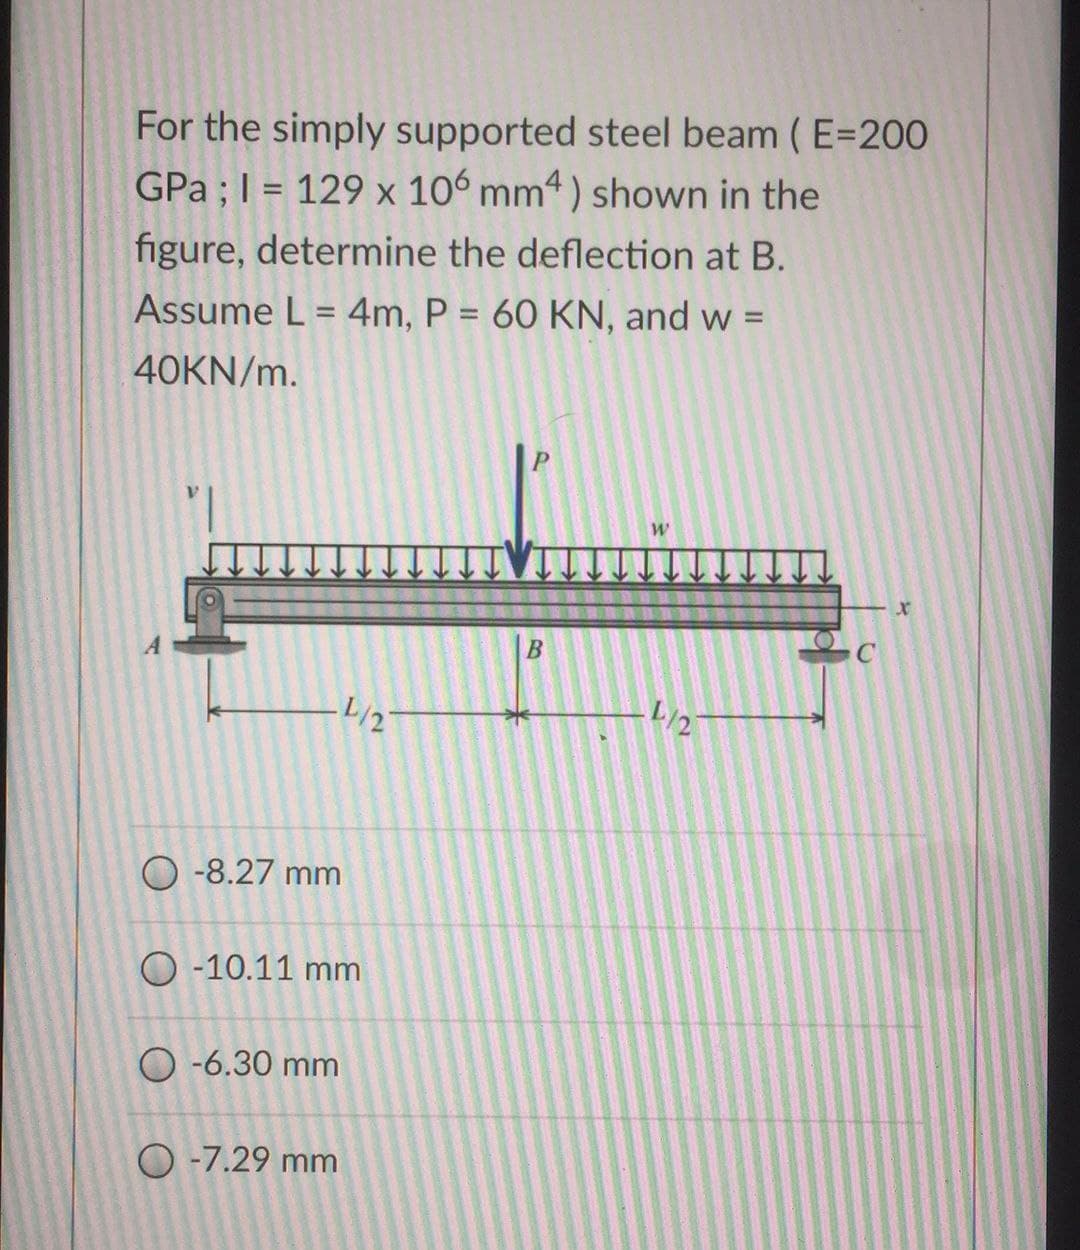 For the simply supported steel beam (E=200
GPa ; 1= 129 x 106 mm4) shown in the
figure, determine the deflection at B.
Assume L = 4m, P = 60 KN, and w =
40KN/m.
-8.27 mm
O-10.11 mm
O-6.30 mm
4/2
O -7.29 mm
B
W
L/27
C